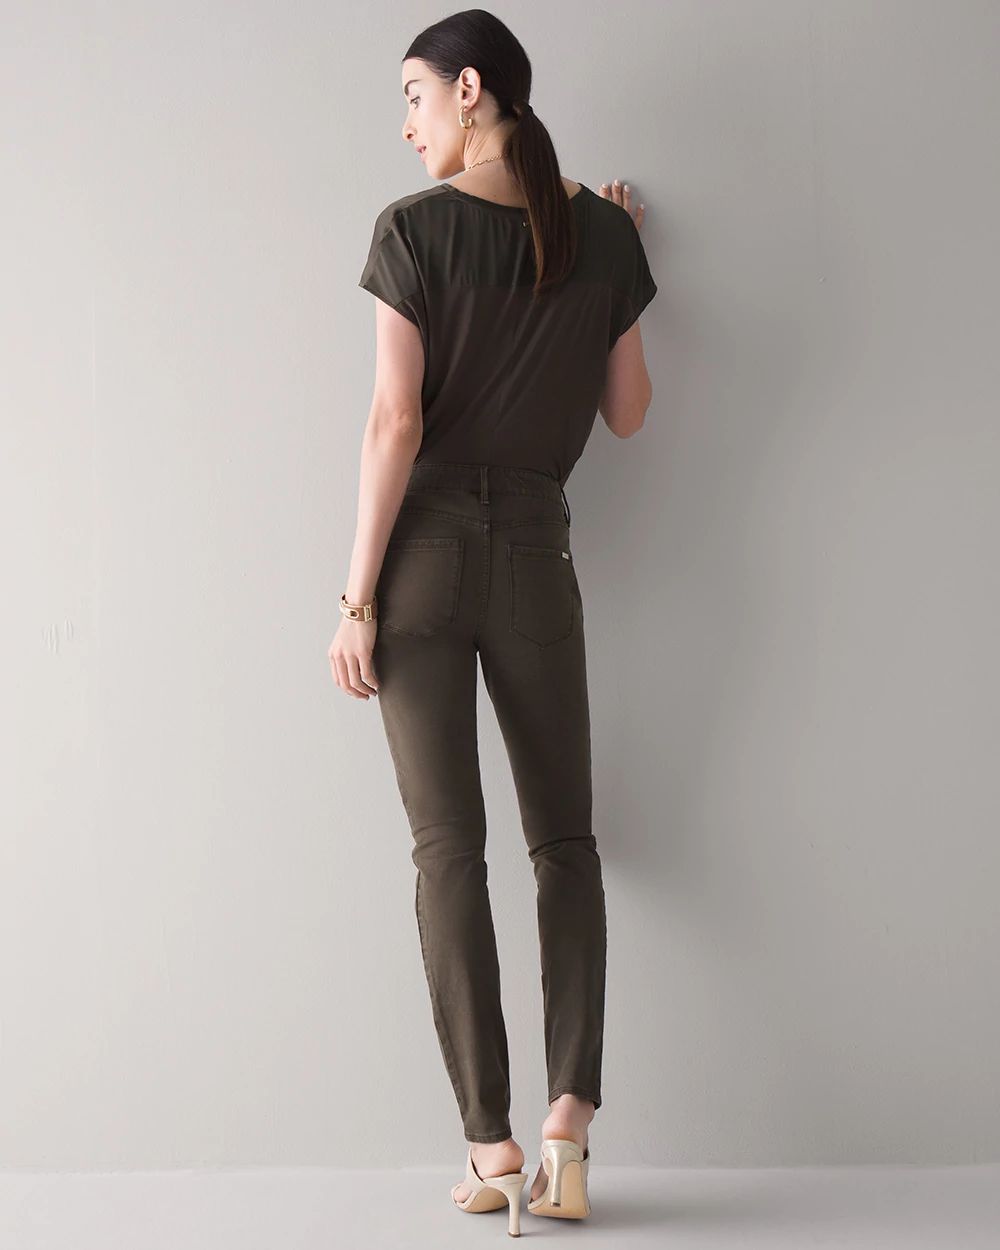 Petite High-Rise Sculpt Skinny Ankle Pants click to view larger image.